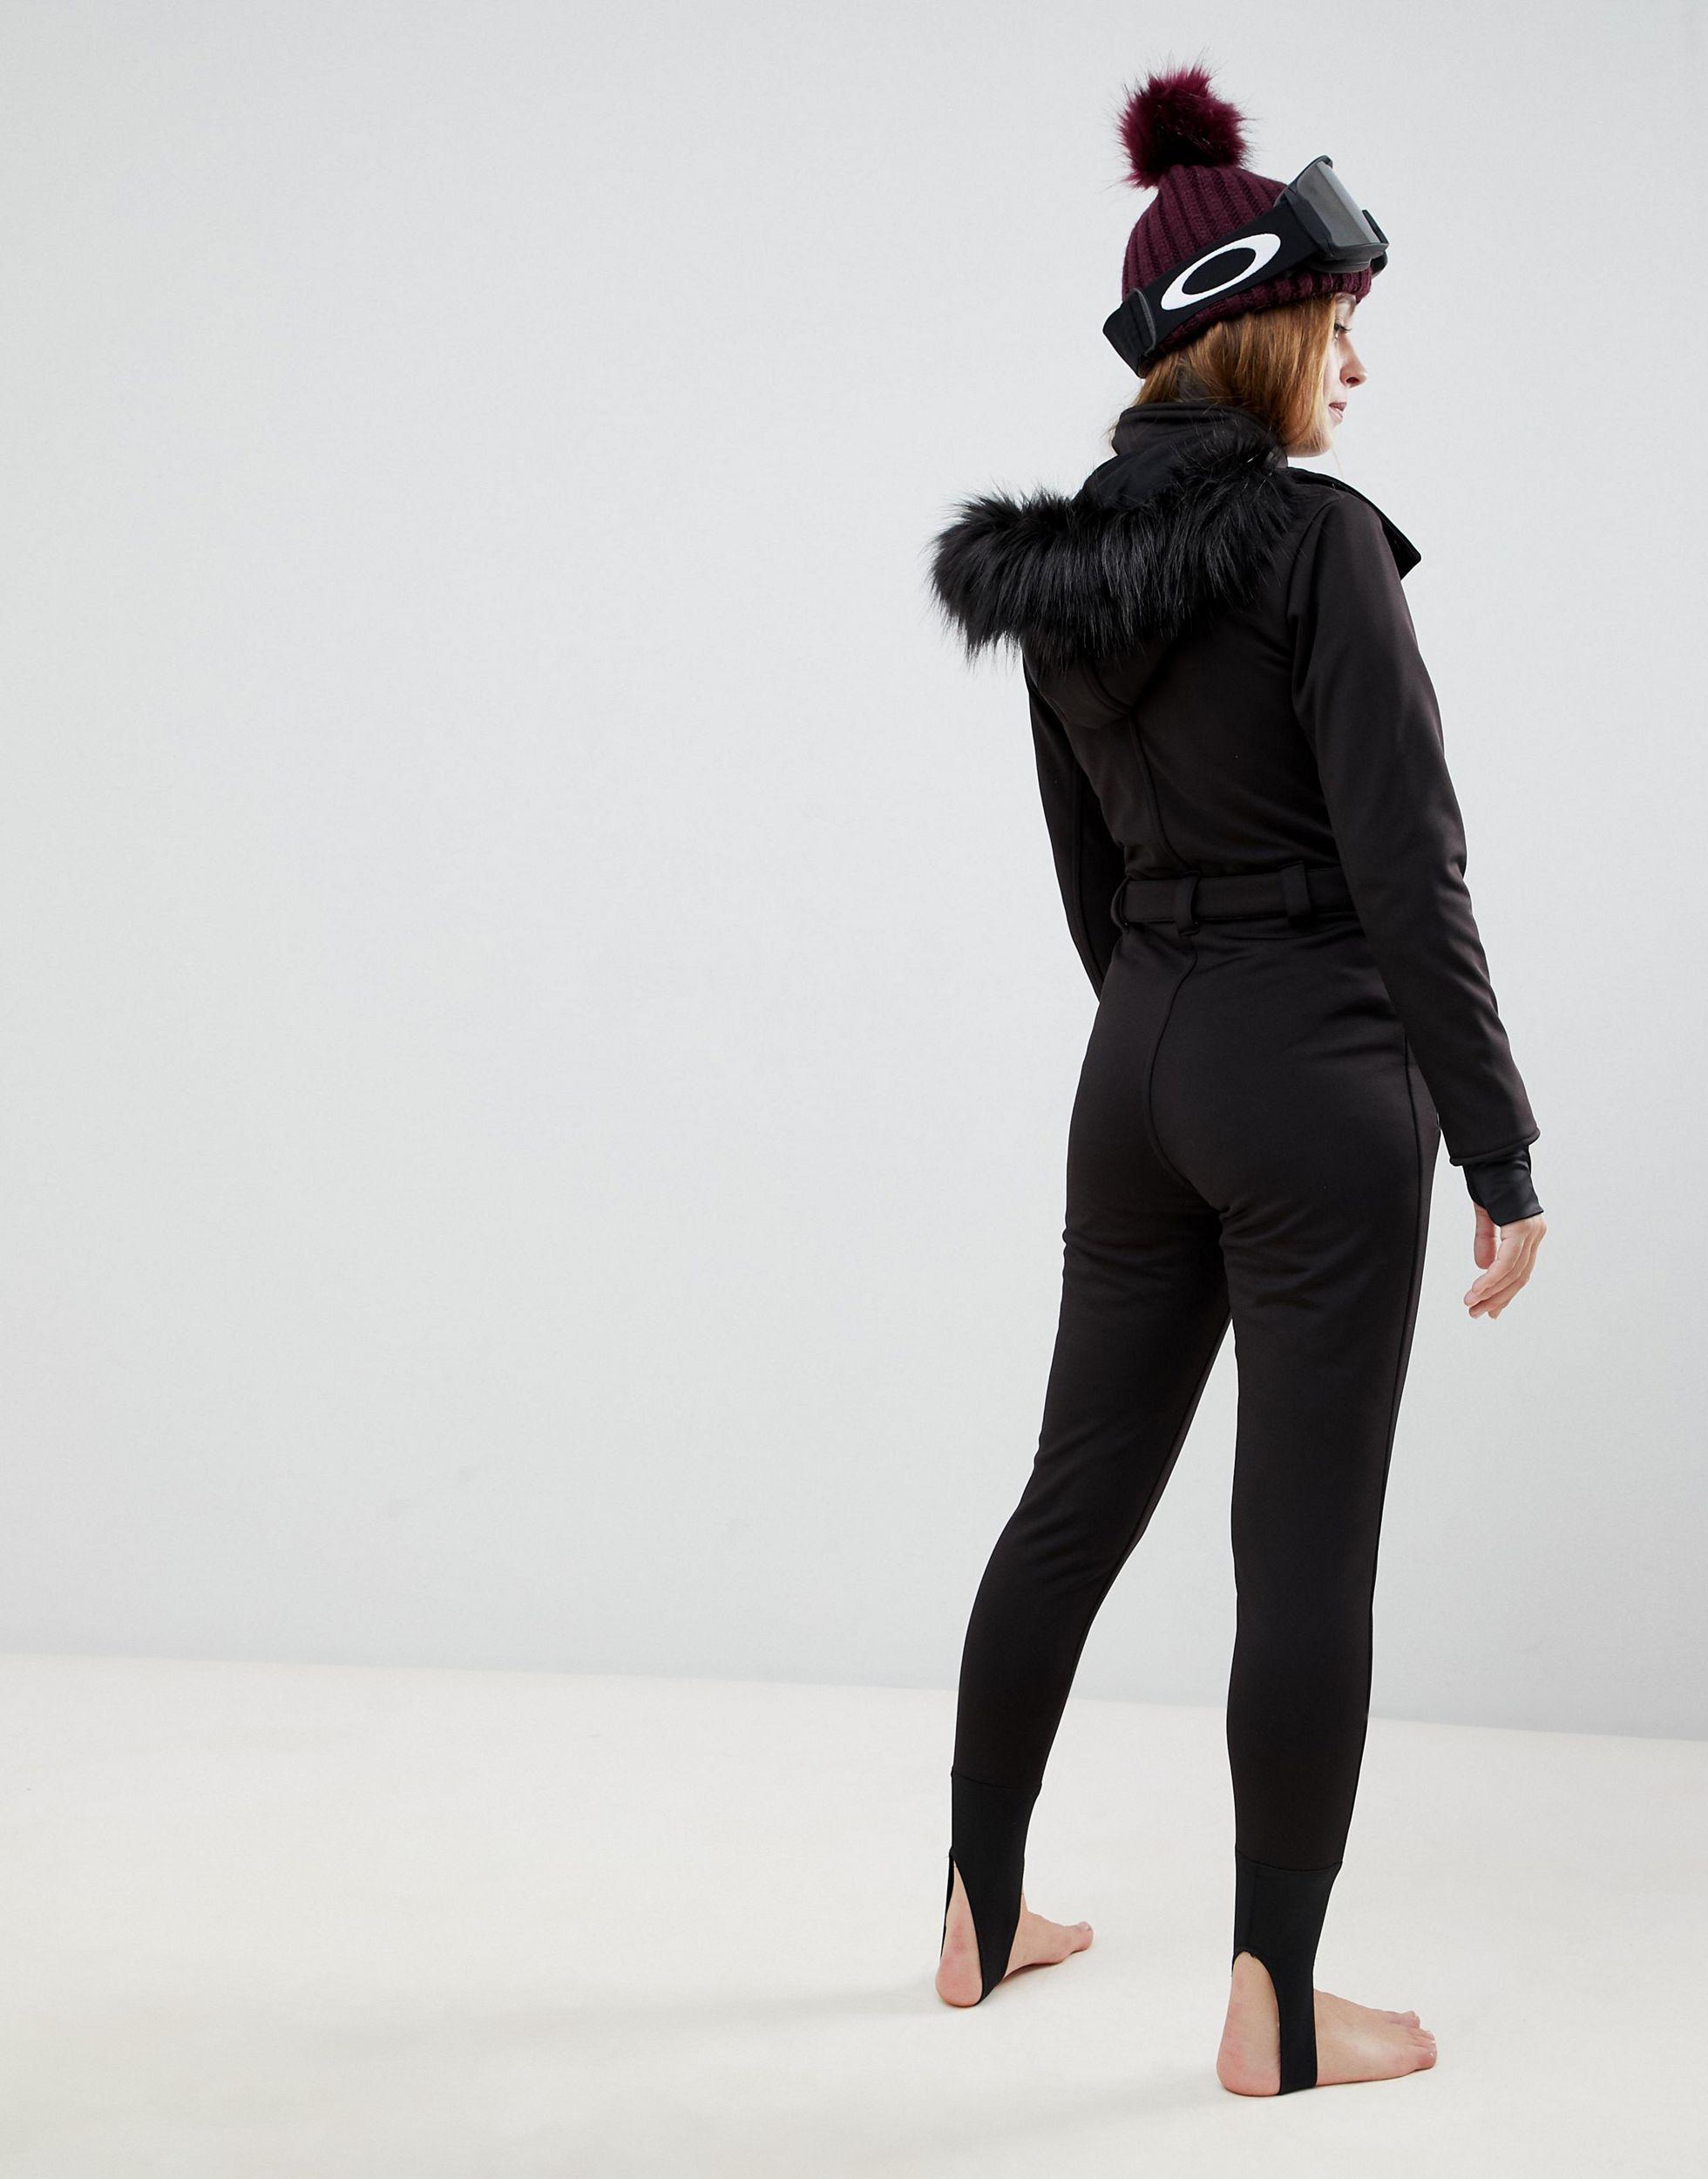 ASOS 4505 – SKI – All-in-One-Jumpsuit